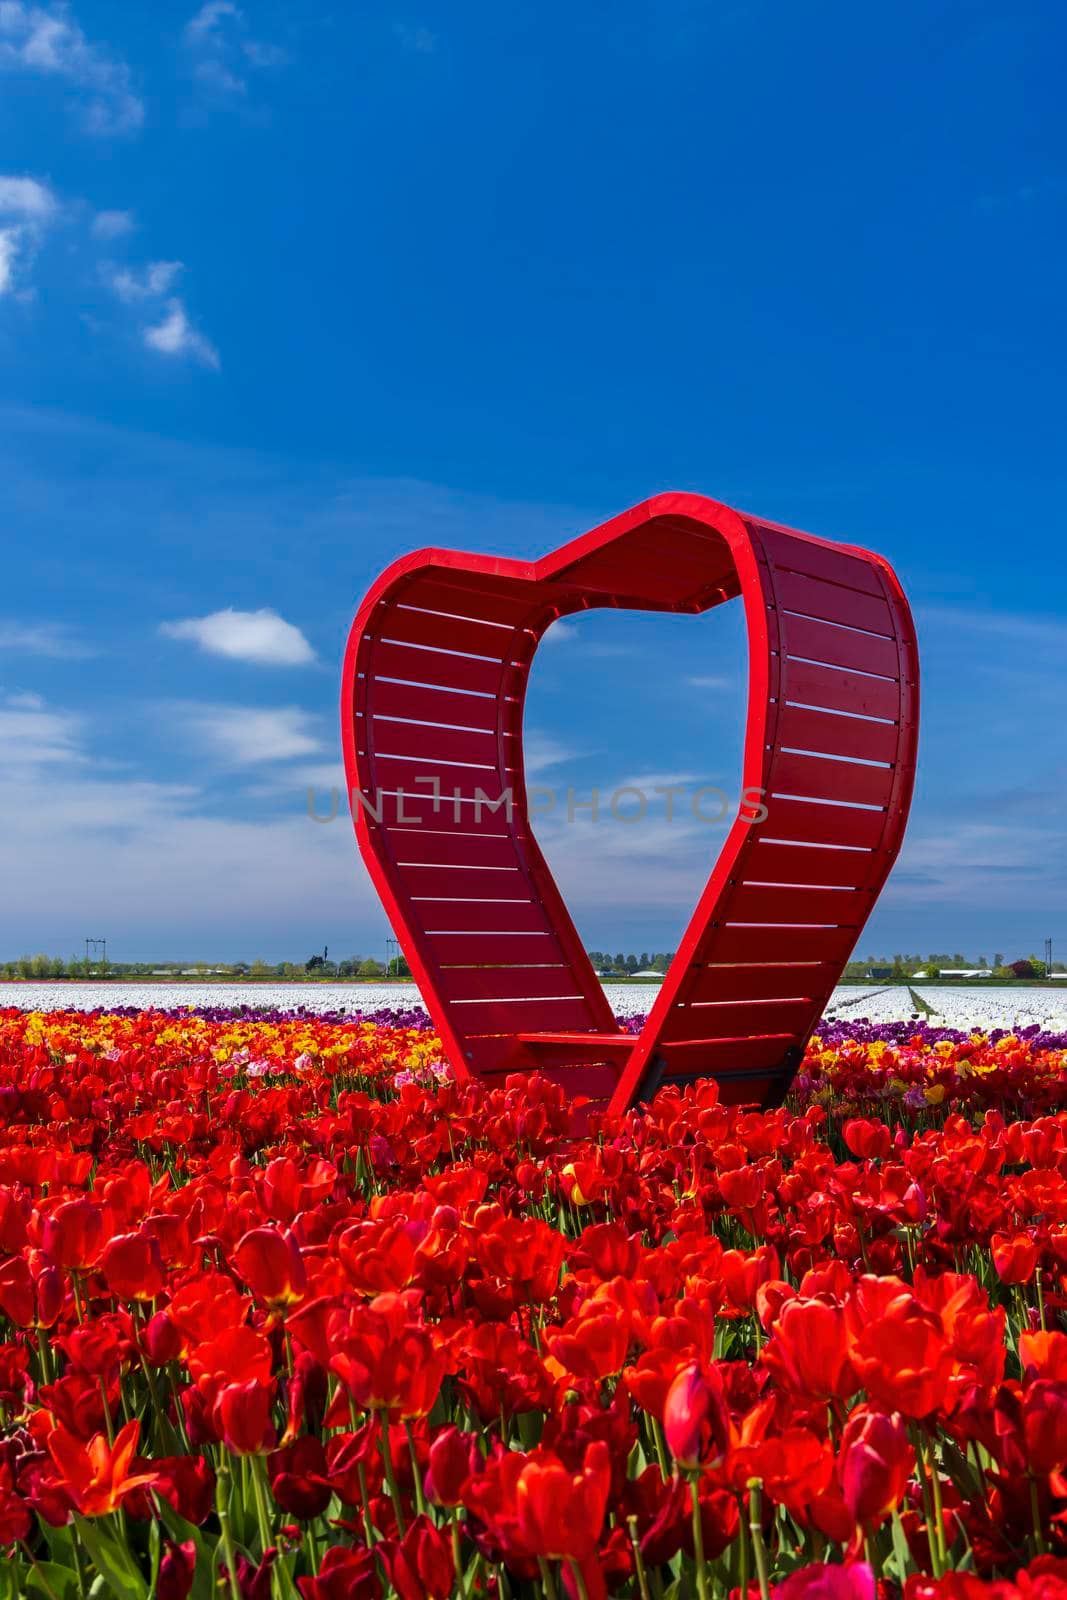 Field of tulips with red heart near Keukenhof, The Netherlands by phbcz